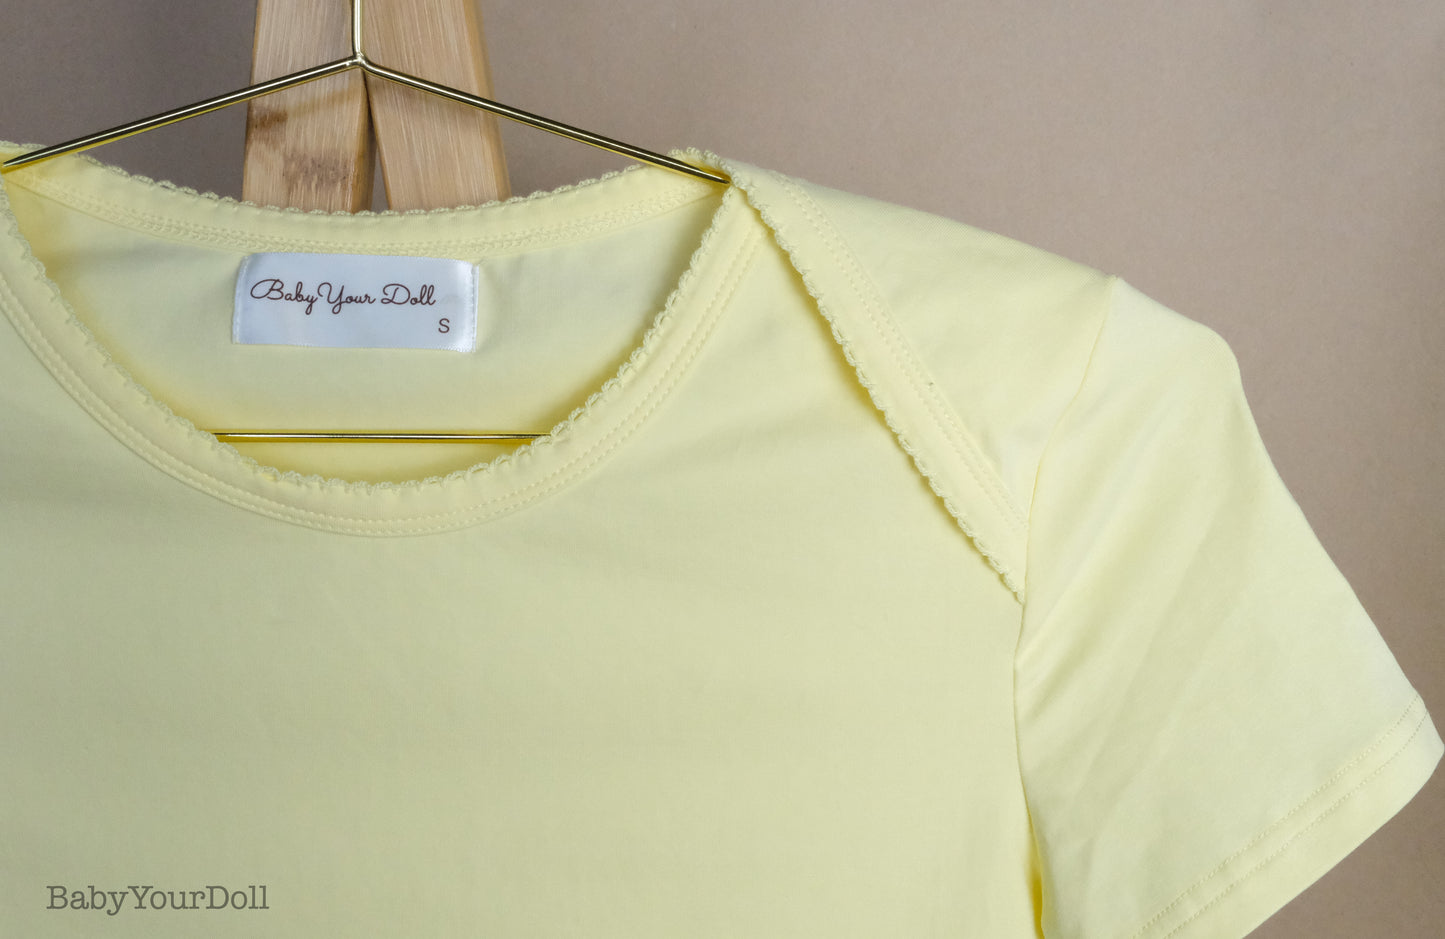 Baby Yellow Lapped Shoulder Tee